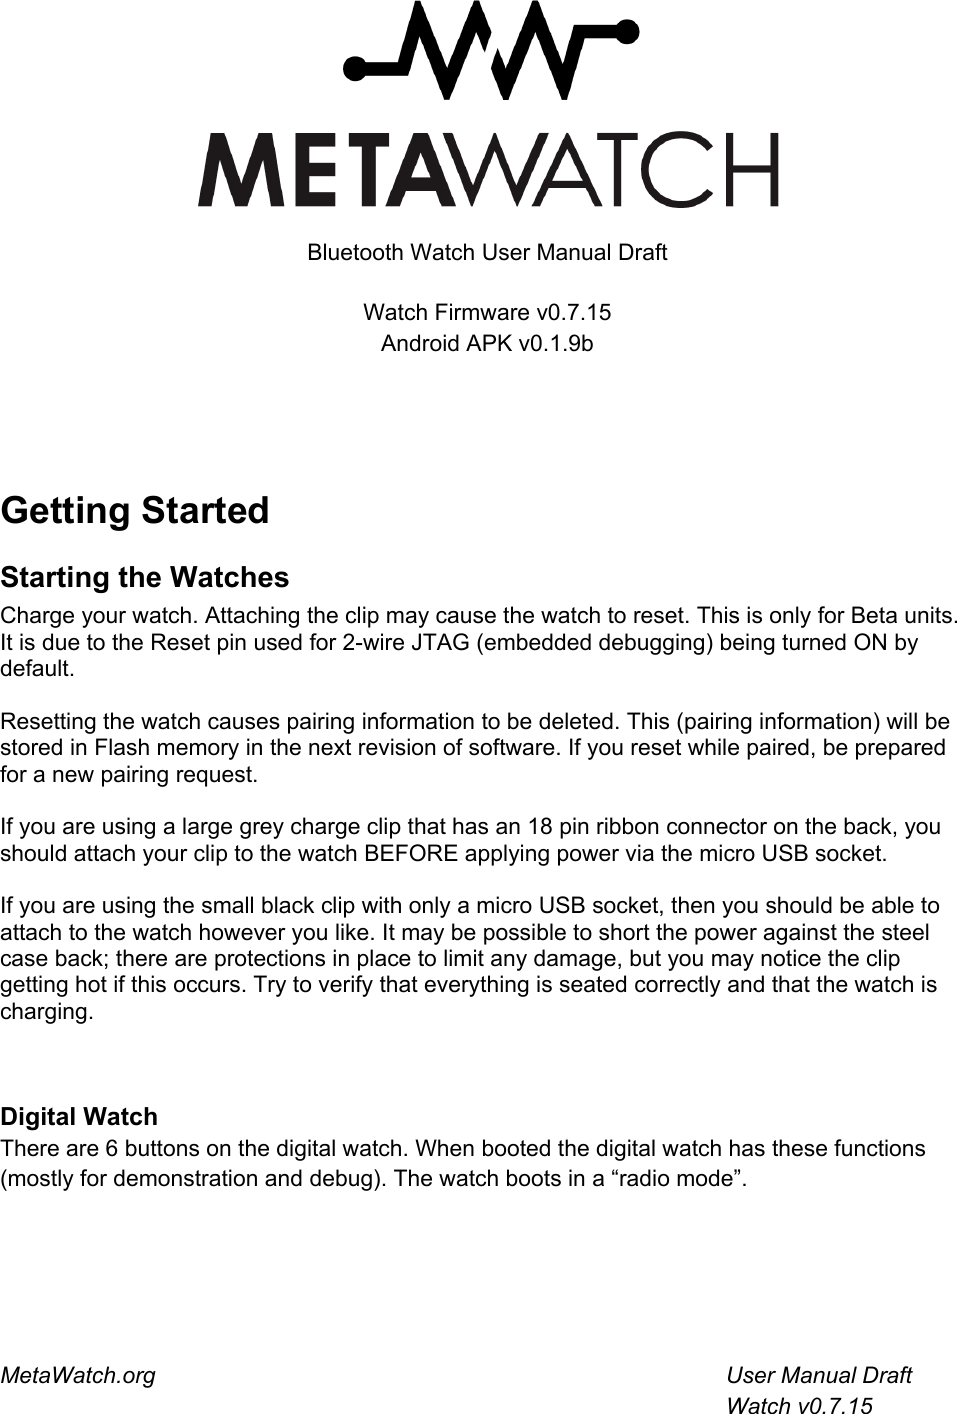  Bluetooth Watch User Manual Draft Watch Firmware v0.7.15Android APK v0.1.9b   Getting StartedStarting the WatchesCharge your watch. Attaching the clip may cause the watch to reset. This is only for Beta units. It is due to the Reset pin used for 2-wire JTAG (embedded debugging) being turned ON by default. Resetting the watch causes pairing information to be deleted. This (pairing information) will be stored in Flash memory in the next revision of software. If you reset while paired, be prepared for a new pairing request. If you are using a large grey charge clip that has an 18 pin ribbon connector on the back, you should attach your clip to the watch BEFORE applying power via the micro USB socket. If you are using the small black clip with only a micro USB socket, then you should be able to attach to the watch however you like. It may be possible to short the power against the steel case back; there are protections in place to limit any damage, but you may notice the clip getting hot if this occurs. Try to verify that everything is seated correctly and that the watch is charging.  Digital WatchThere are 6 buttons on the digital watch. When booted the digital watch has these functions (mostly for demonstration and debug). The watch boots in a “radio mode”. MetaWatch.org         User Manual Draft          APK v0.1.9b        Watch v0.7.15